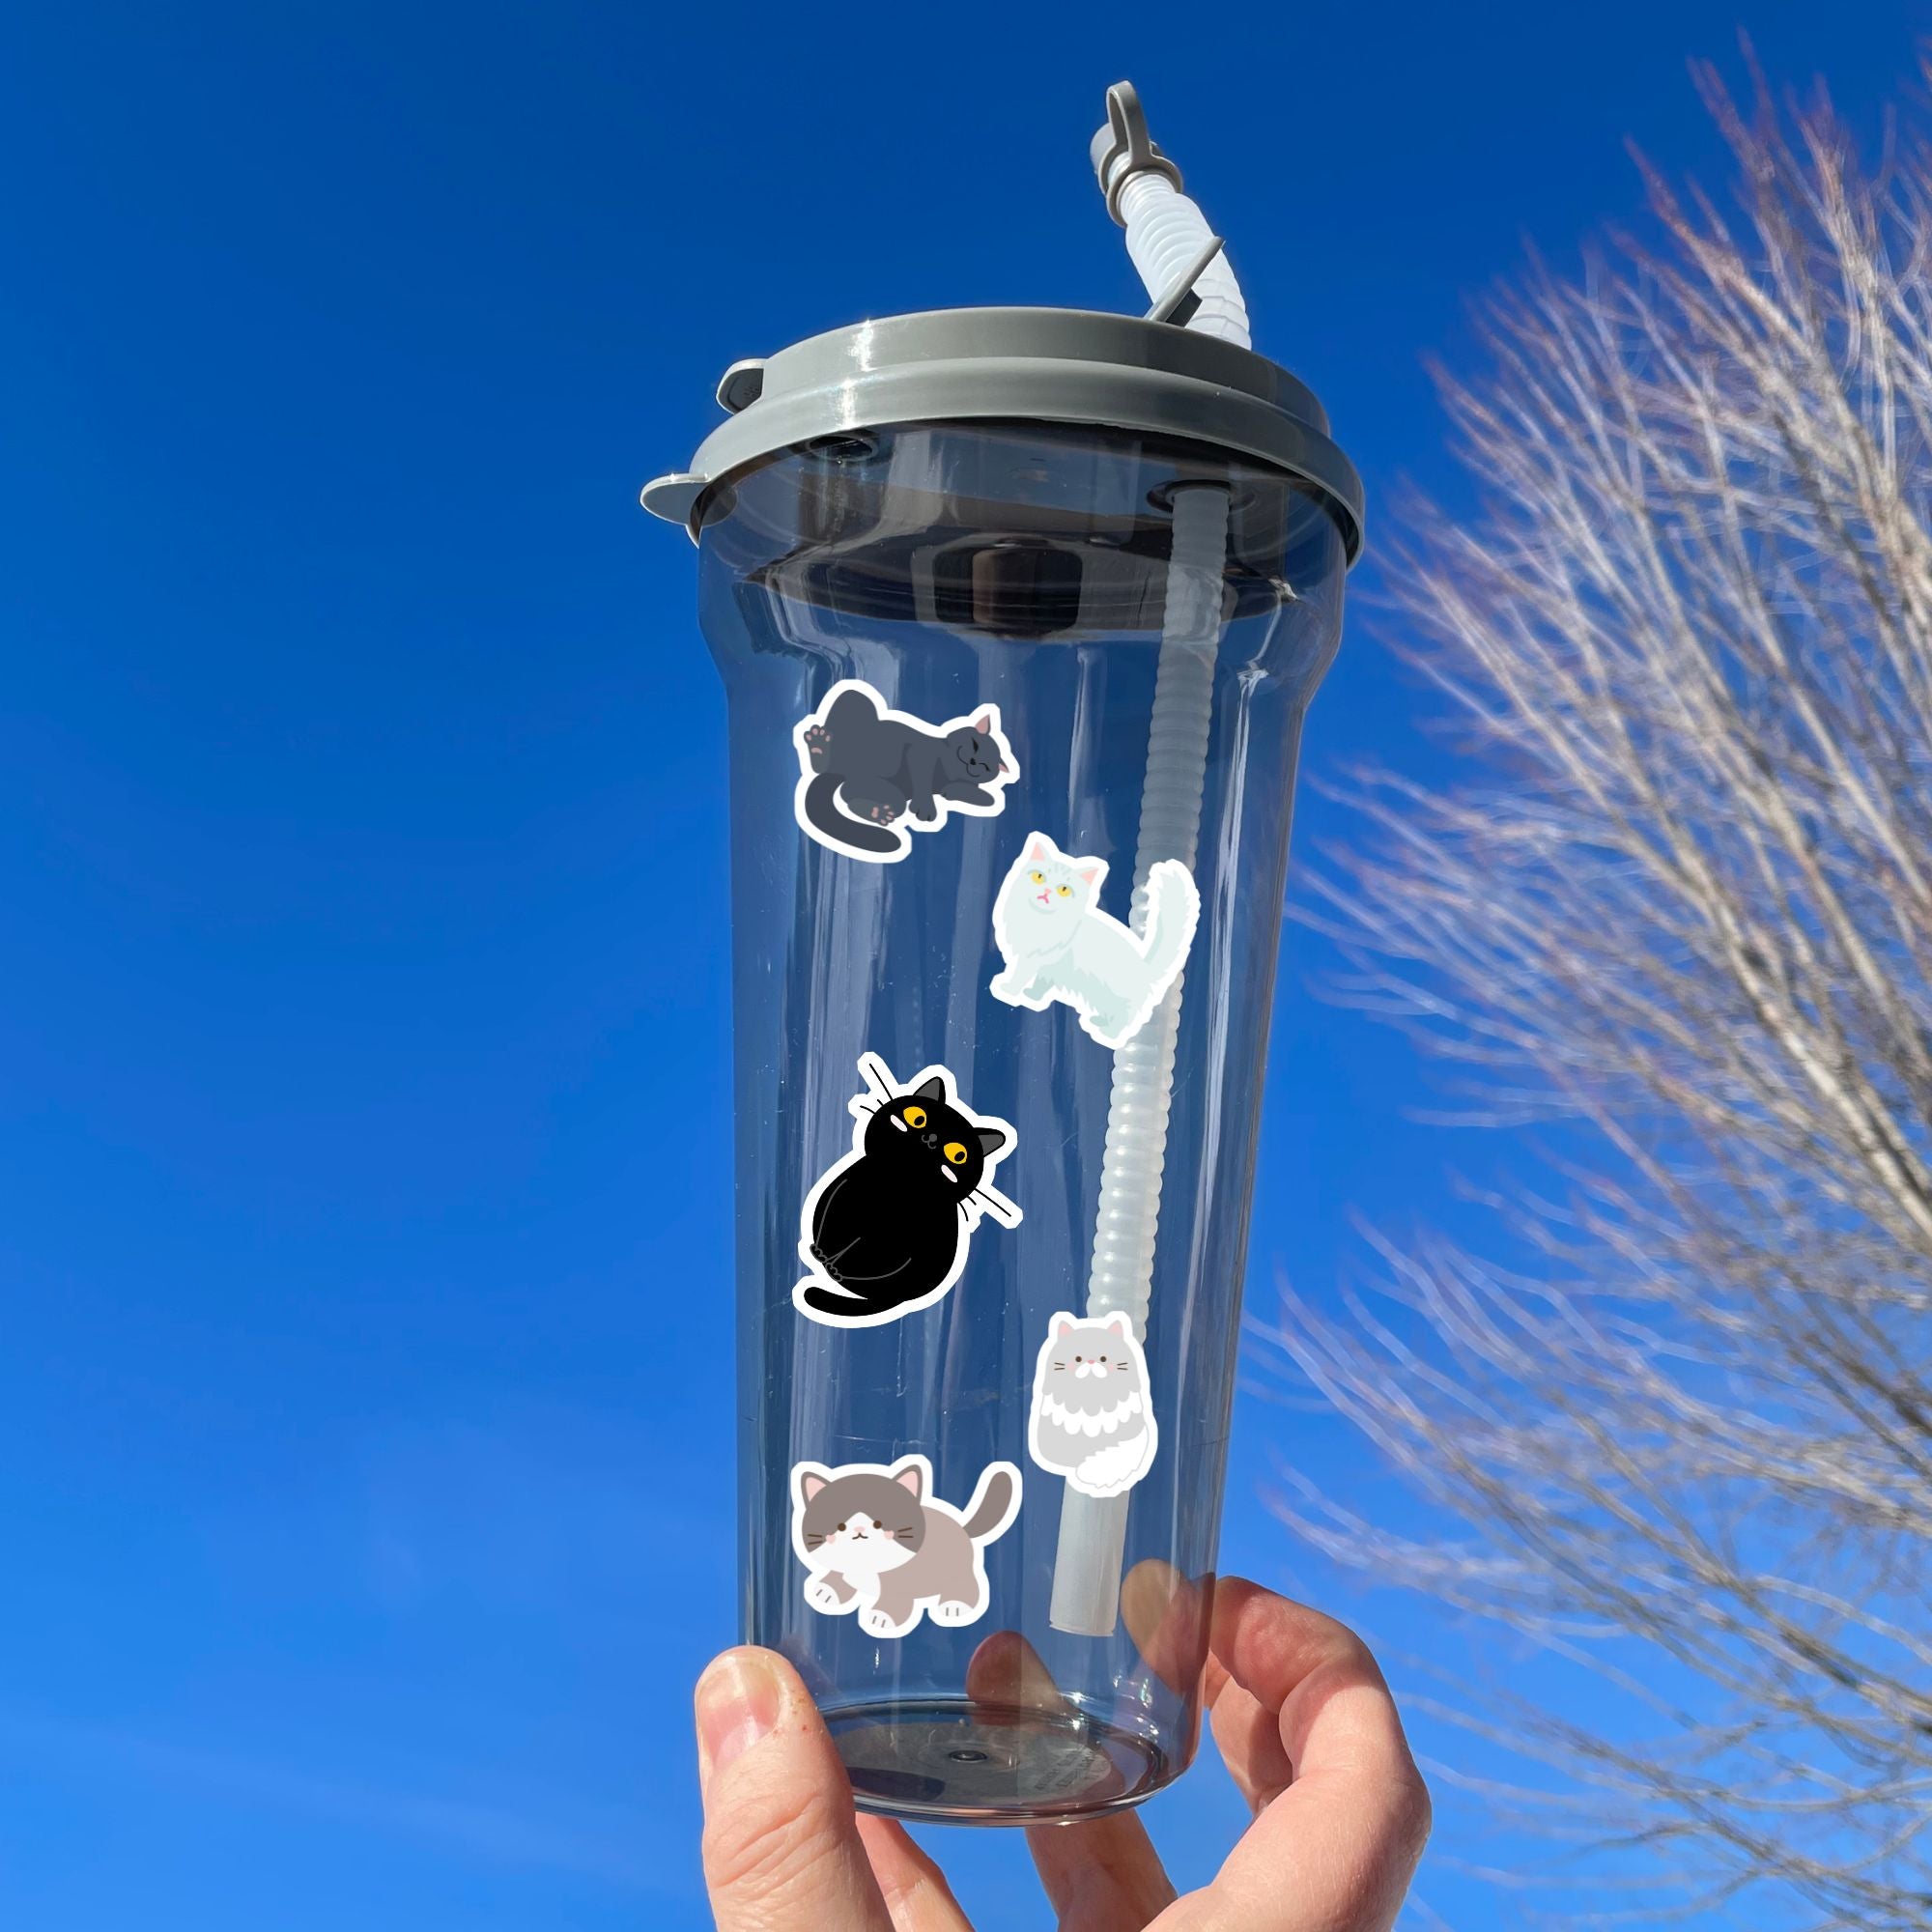 This sticker sheet is purrfect for all cat lovers! It has stickers of 12 different cute and cuddly cats, plus two pawprint stickers.  This image shows a water bottle with five of the cat stickers applied to it.